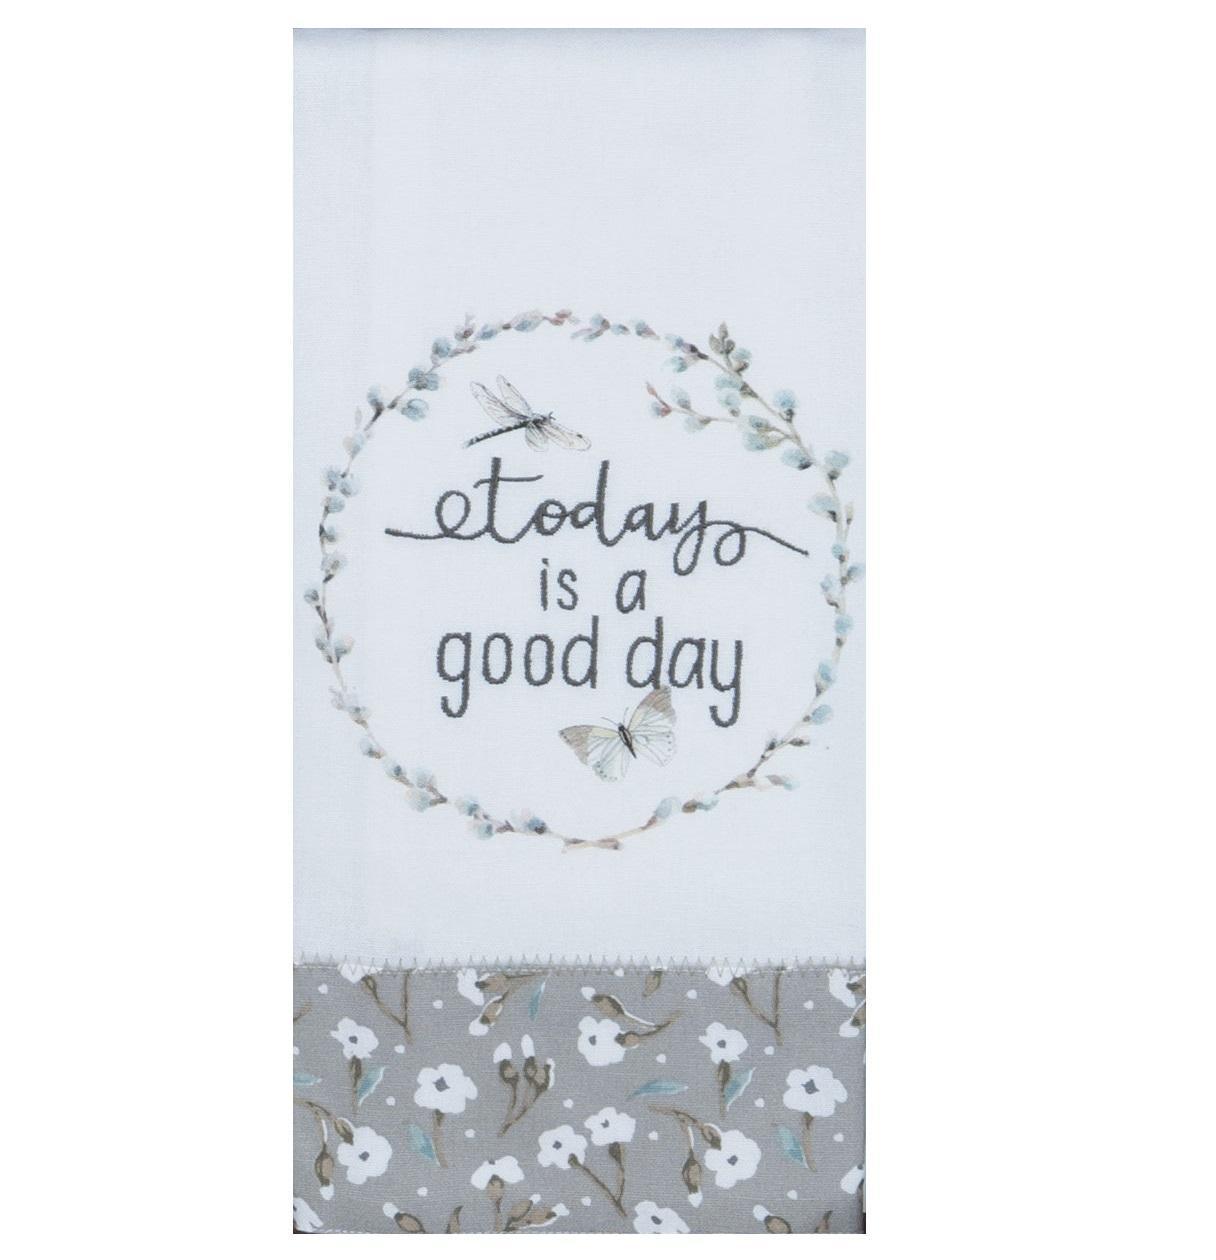 Embroidered Tea Towel "Today is a Good Day"